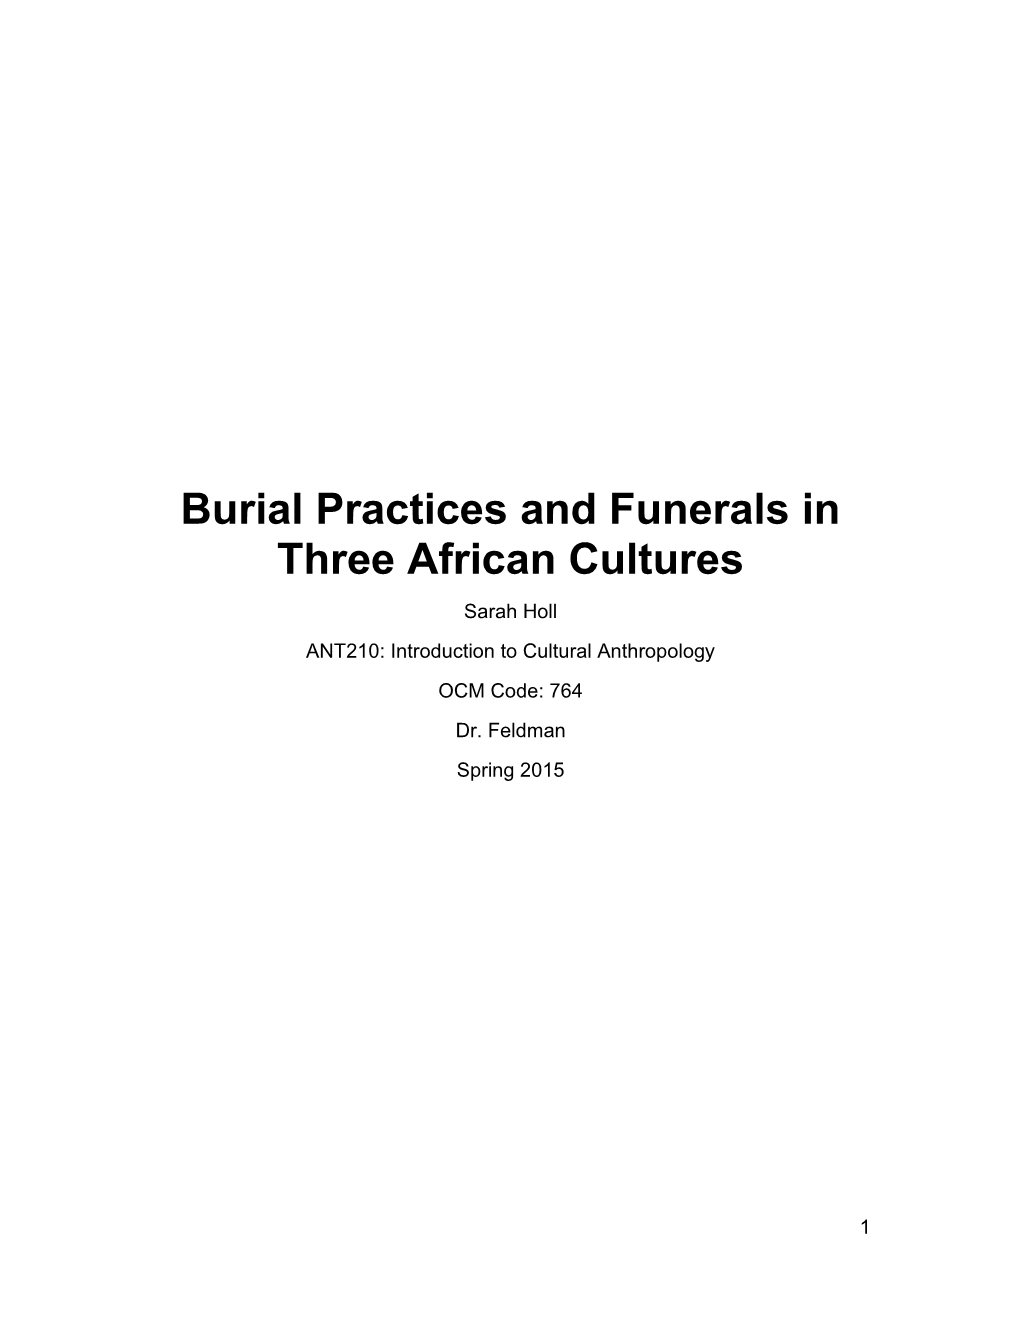 Burial Practices and Funerals in Three African Cultures Sarah Holl ANT210: Introduction to Cultural Anthropology OCM Code: 764 Dr